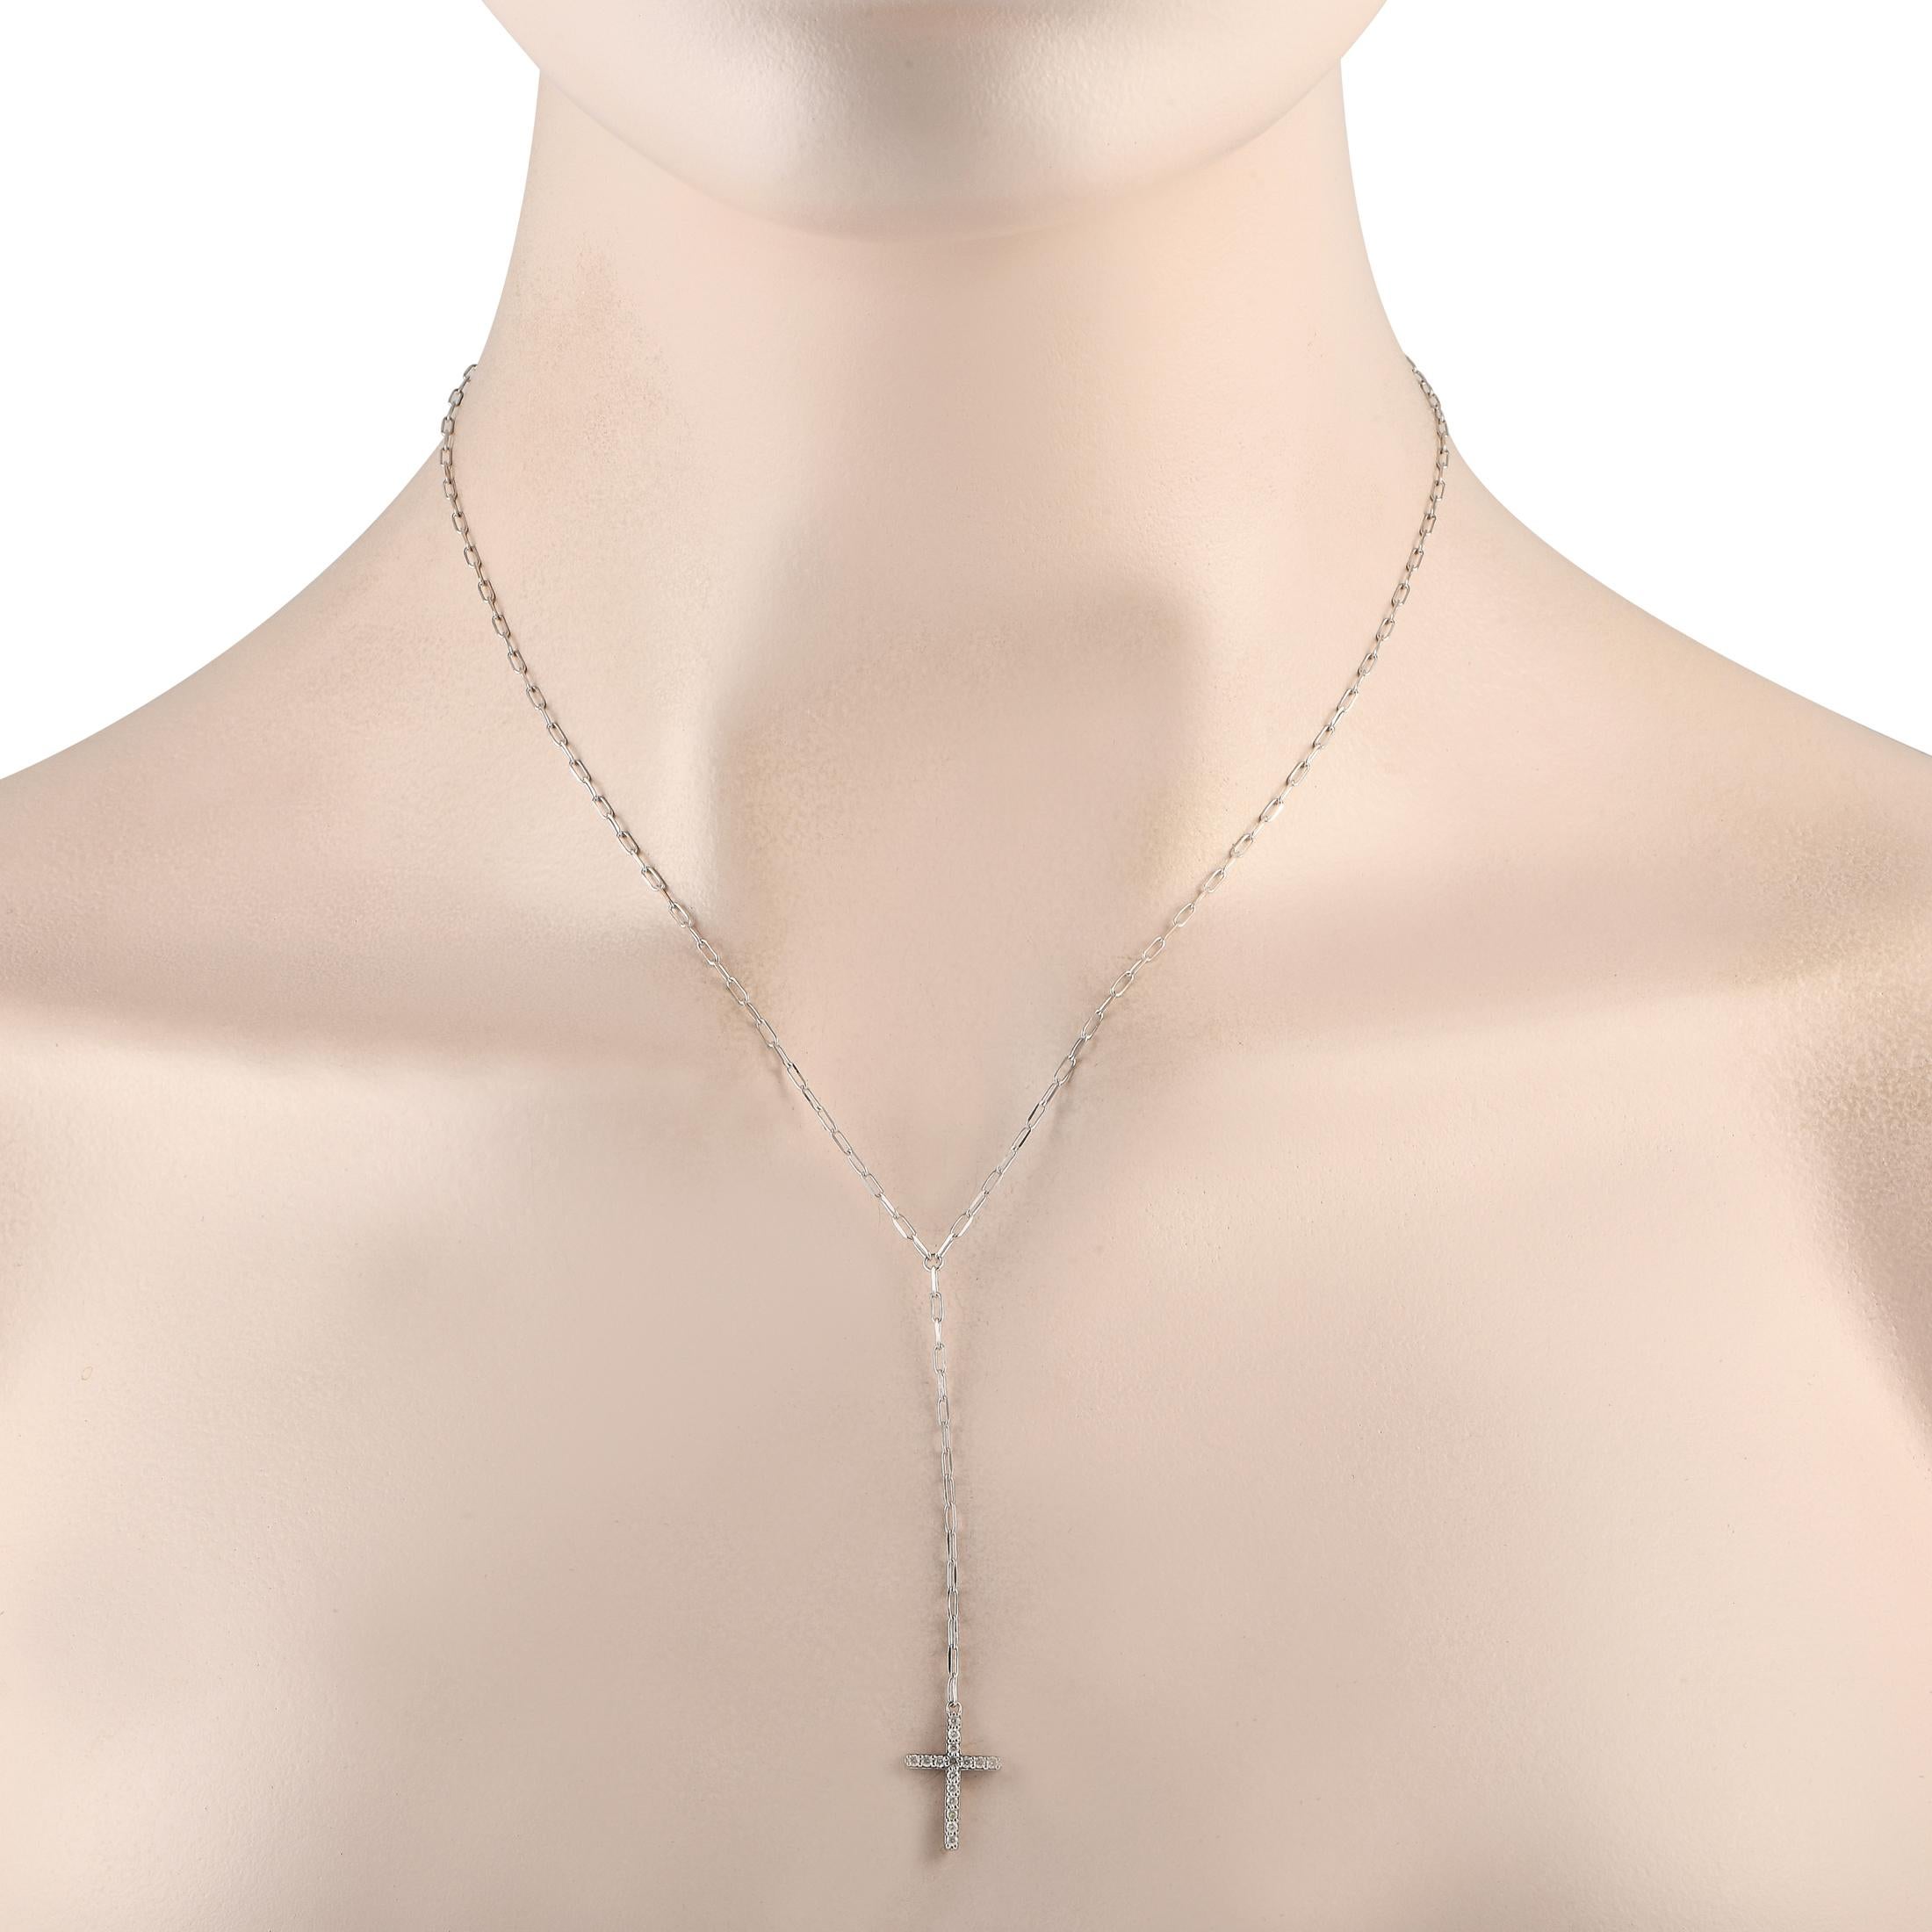 This Y-shaped necklace offers a modern alternative to a traditional cross necklace. Suspended at the center of a delicate 17 chain, a cross-shaped pendant measuring 0.65 long by 0.45 wide is suspended from a 2.75 drop chain. Diamonds with a total